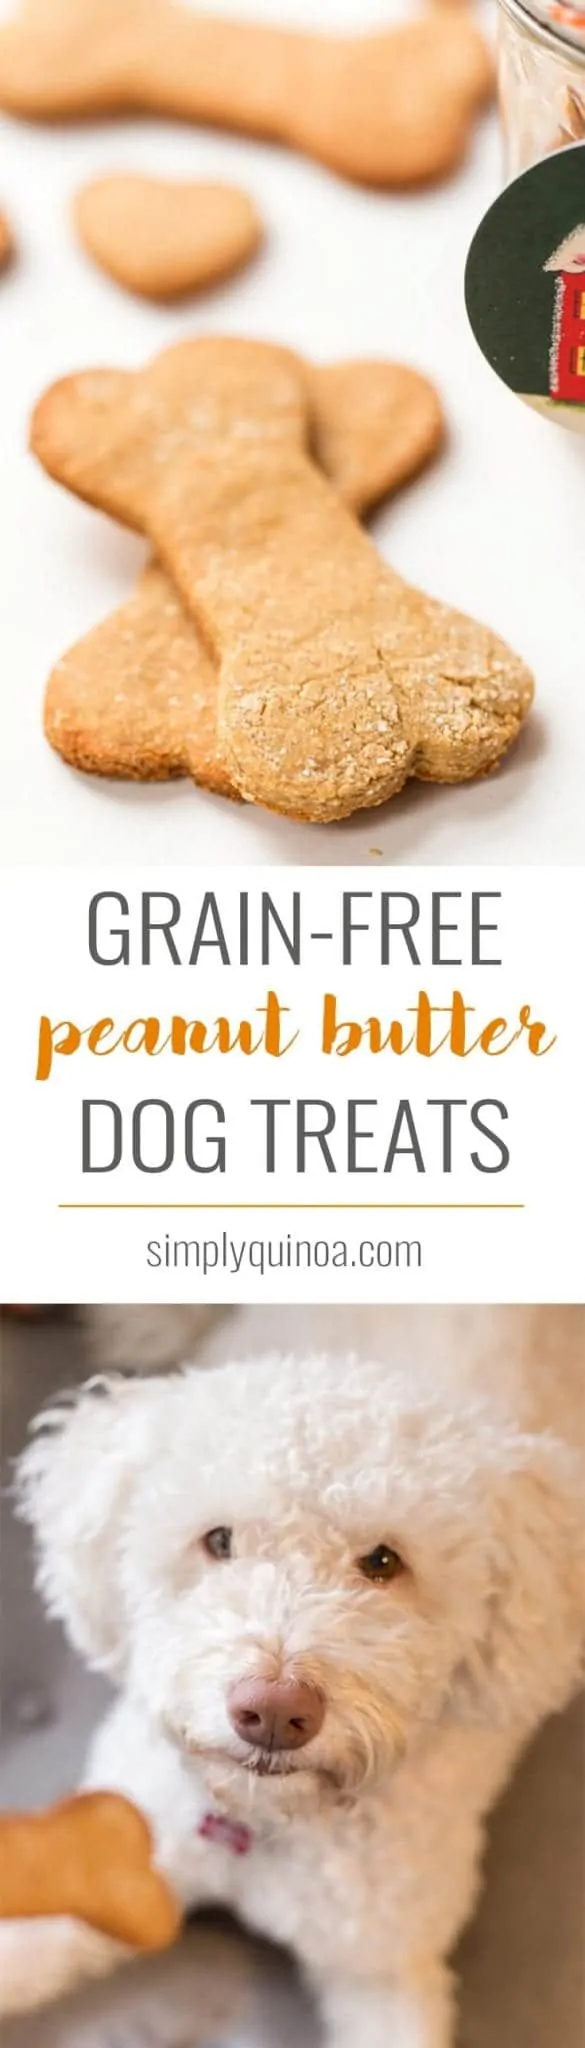 These GRAIN-FREE Peanut Butter Dog Treats are quick, easy and make a great holiday gift. They're high protein, use just 6 ingredients and dog-approved!